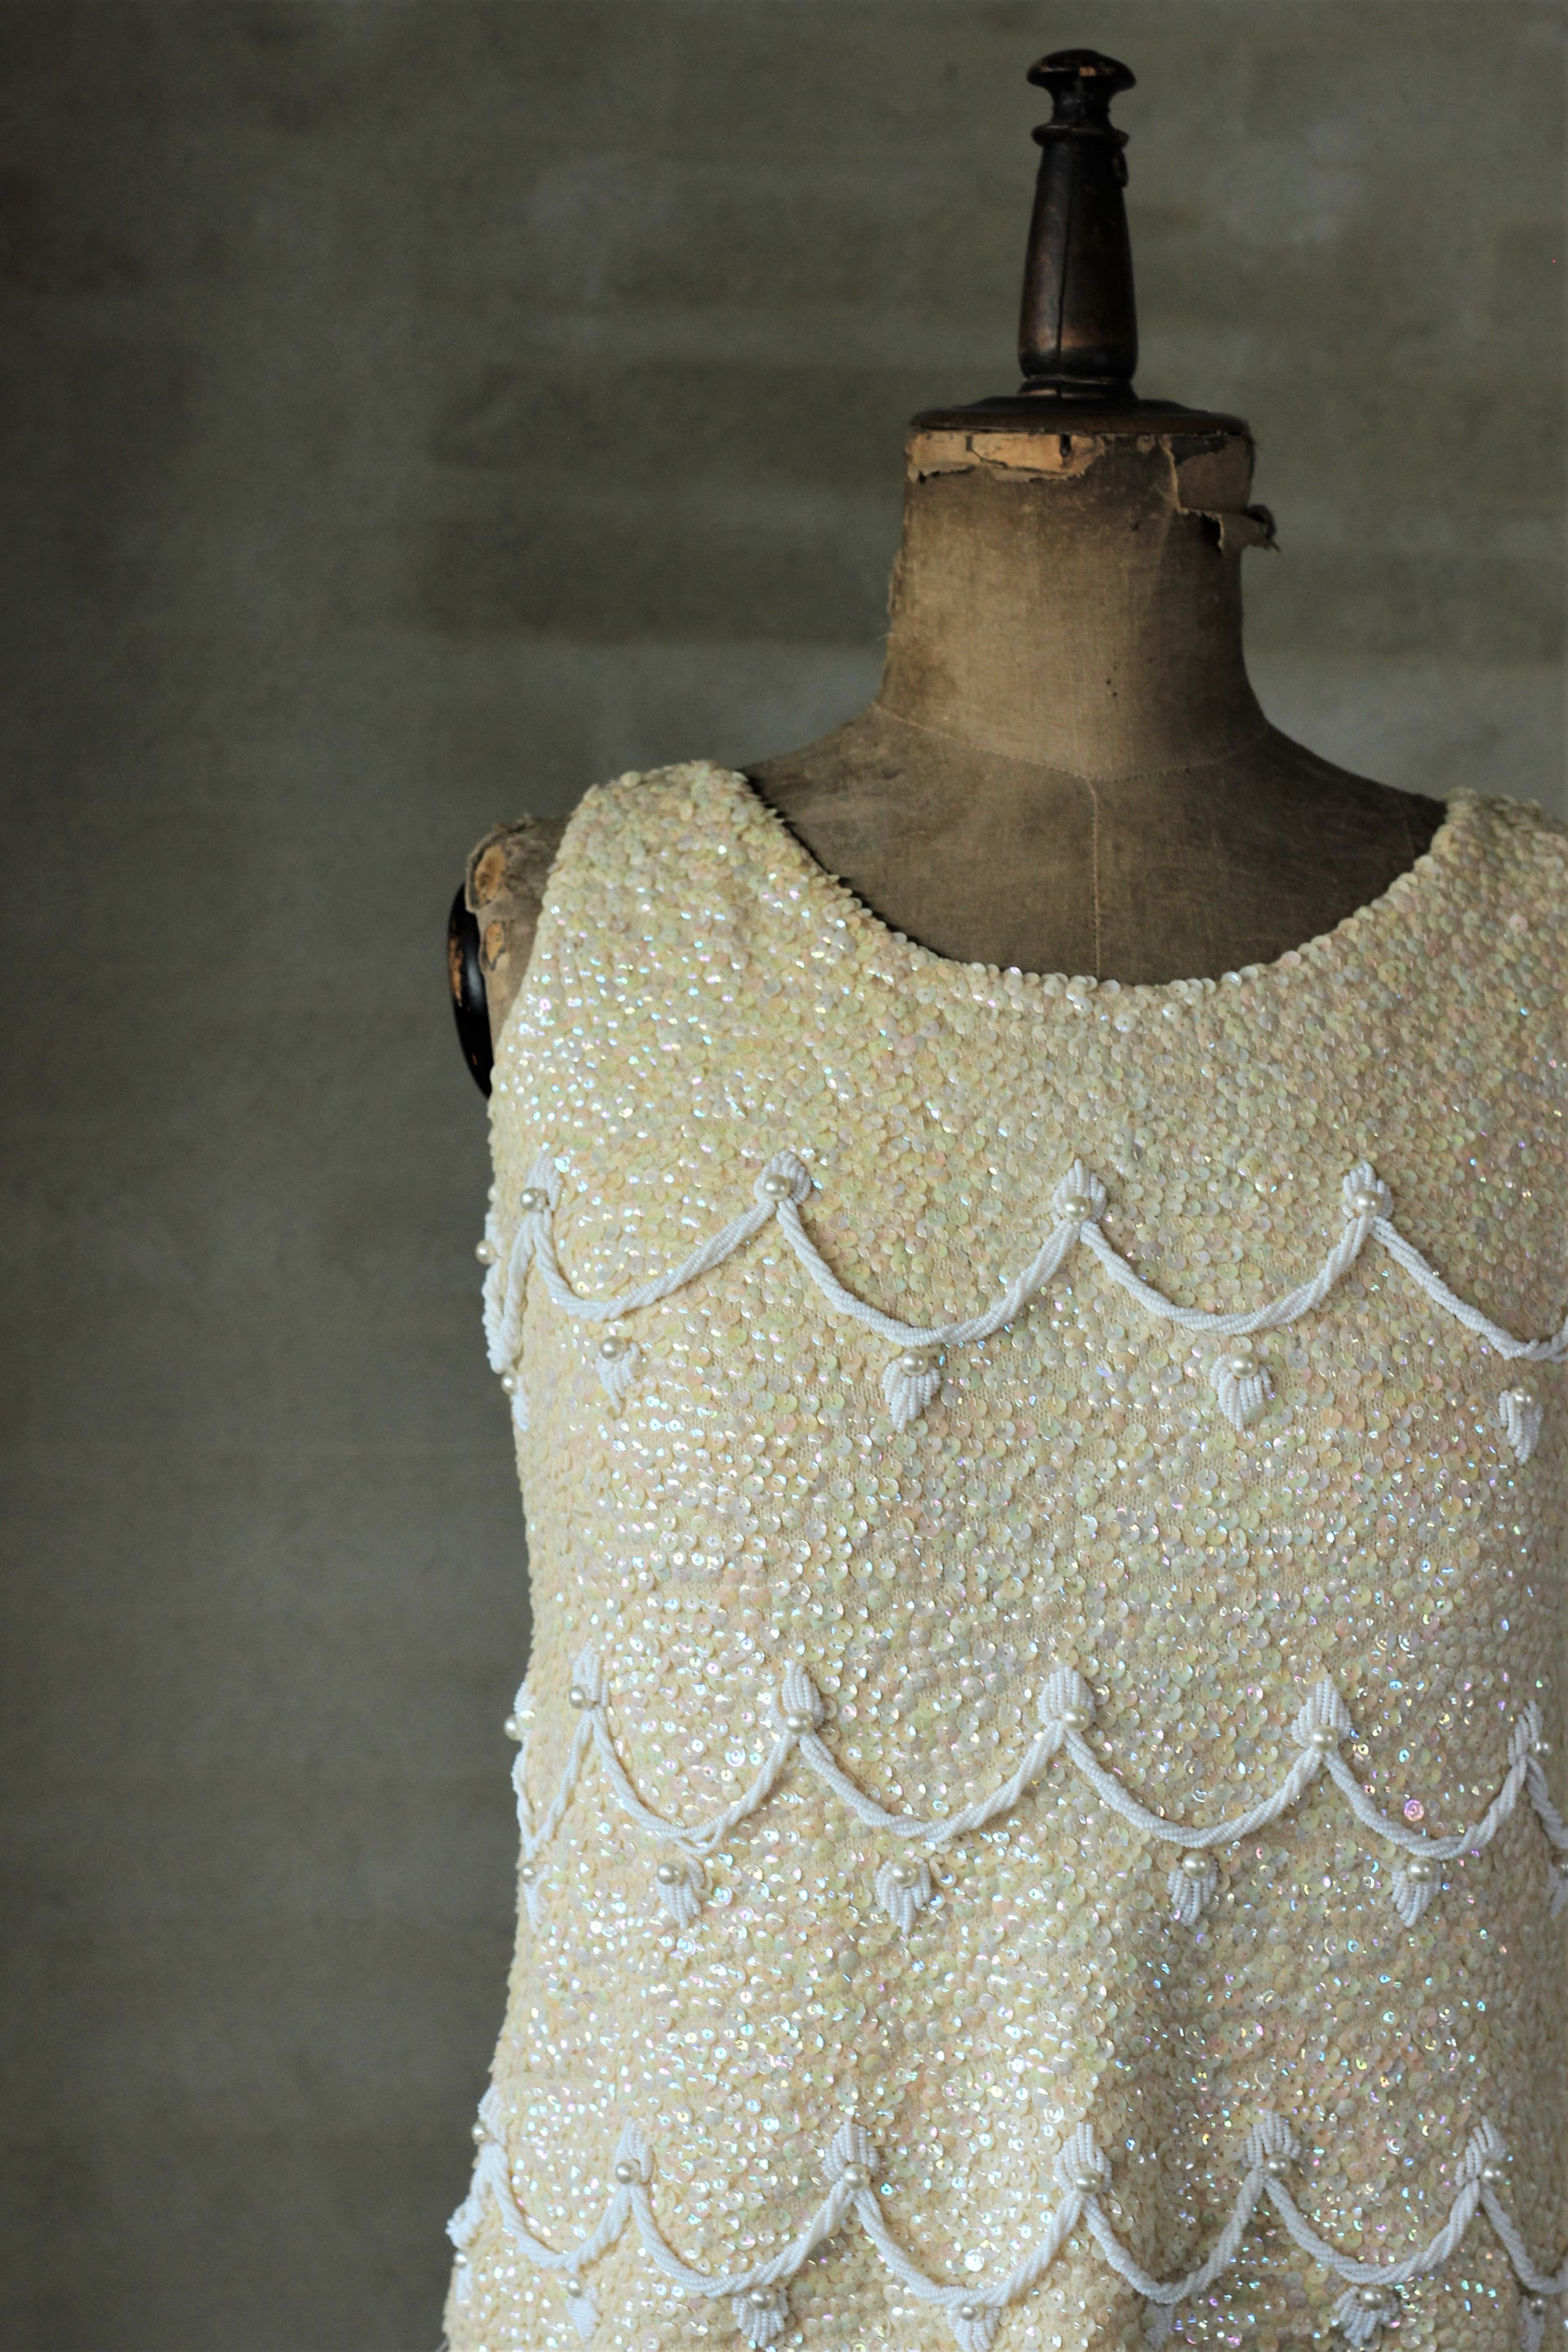 1960s Handbeaded Top with Beads and Sequins//Size M          T9